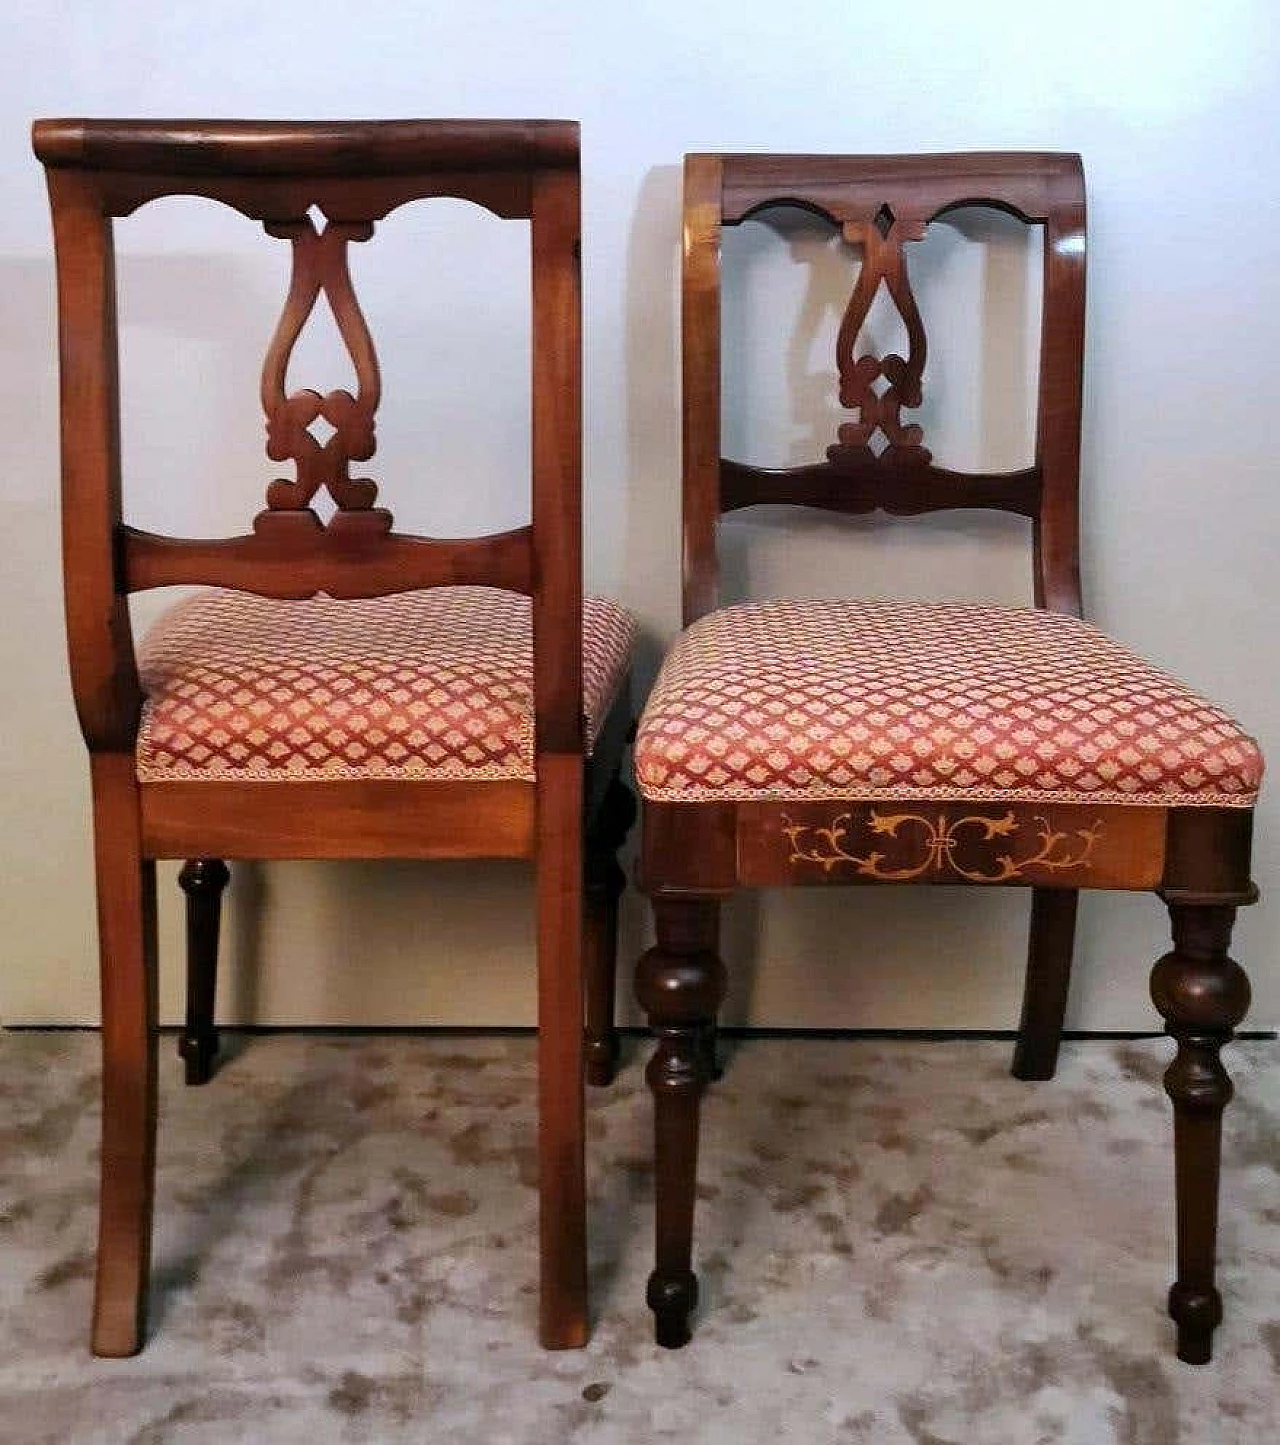 4 Biedermeier style wooden and fabric chairs, mid-19th century 9